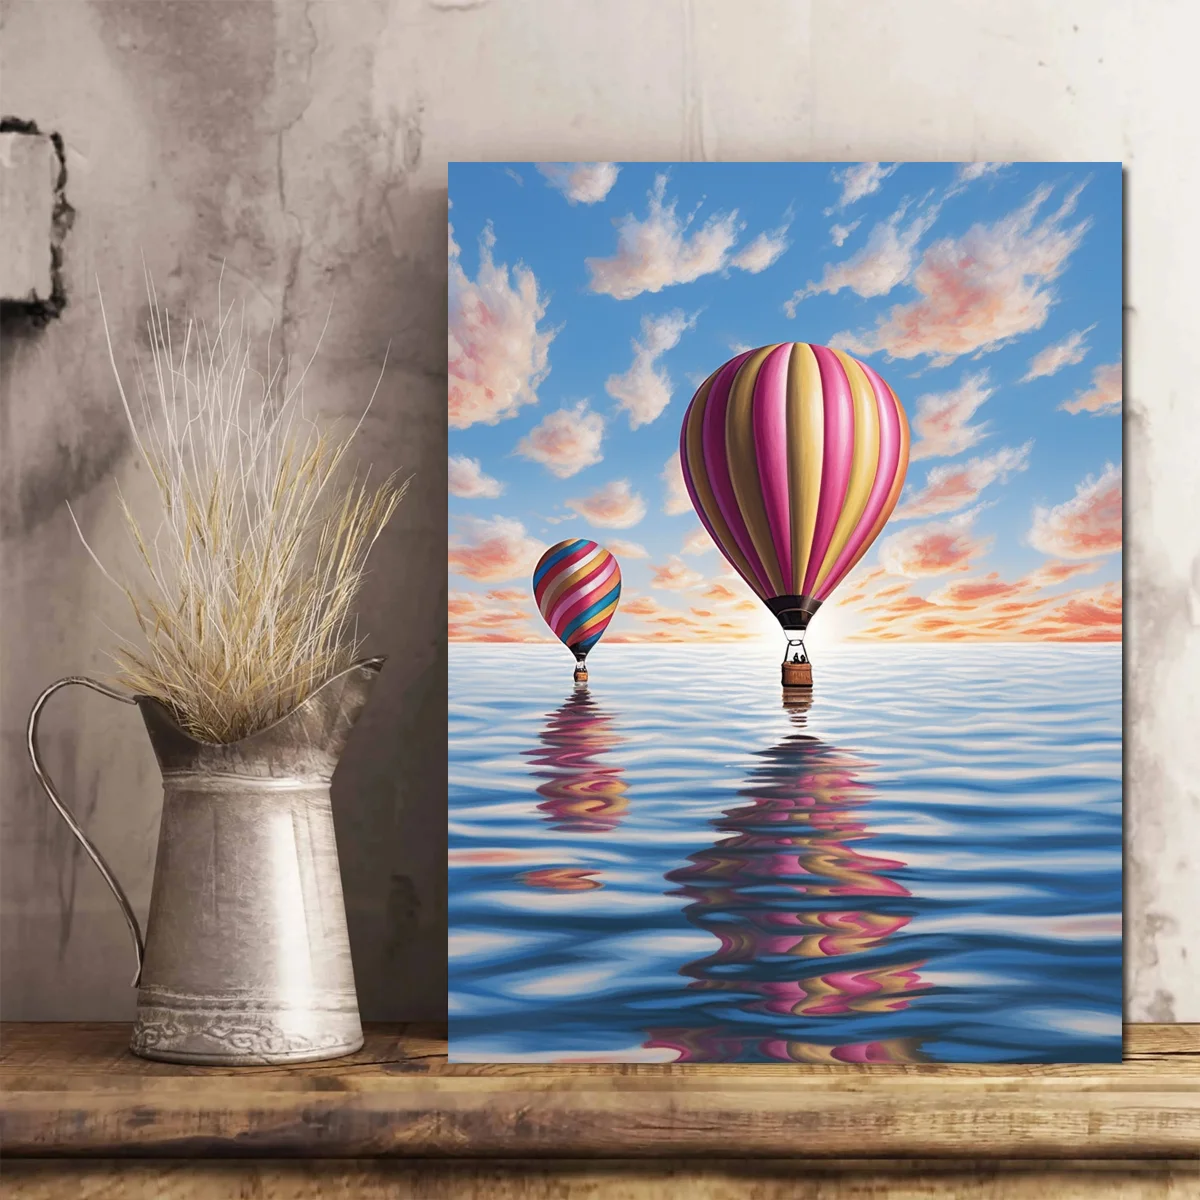 Canvases Paint Numbers Balloons  Hot Air Balloons Paint Numbers - Pictures  Number - Aliexpress